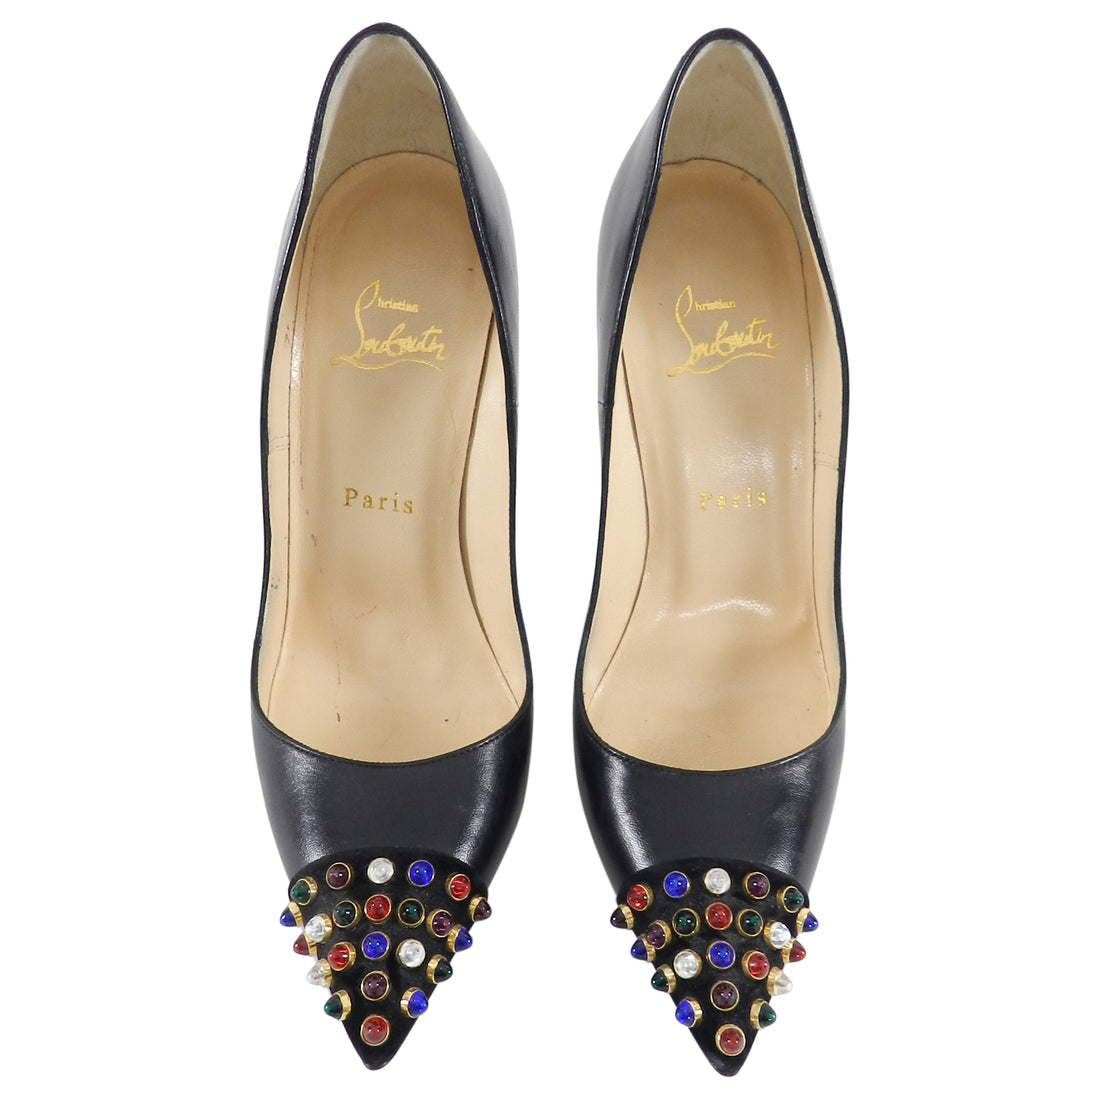 Christian Louboutin Cabo 120 Pump with Jewel Embellished Toe - 38